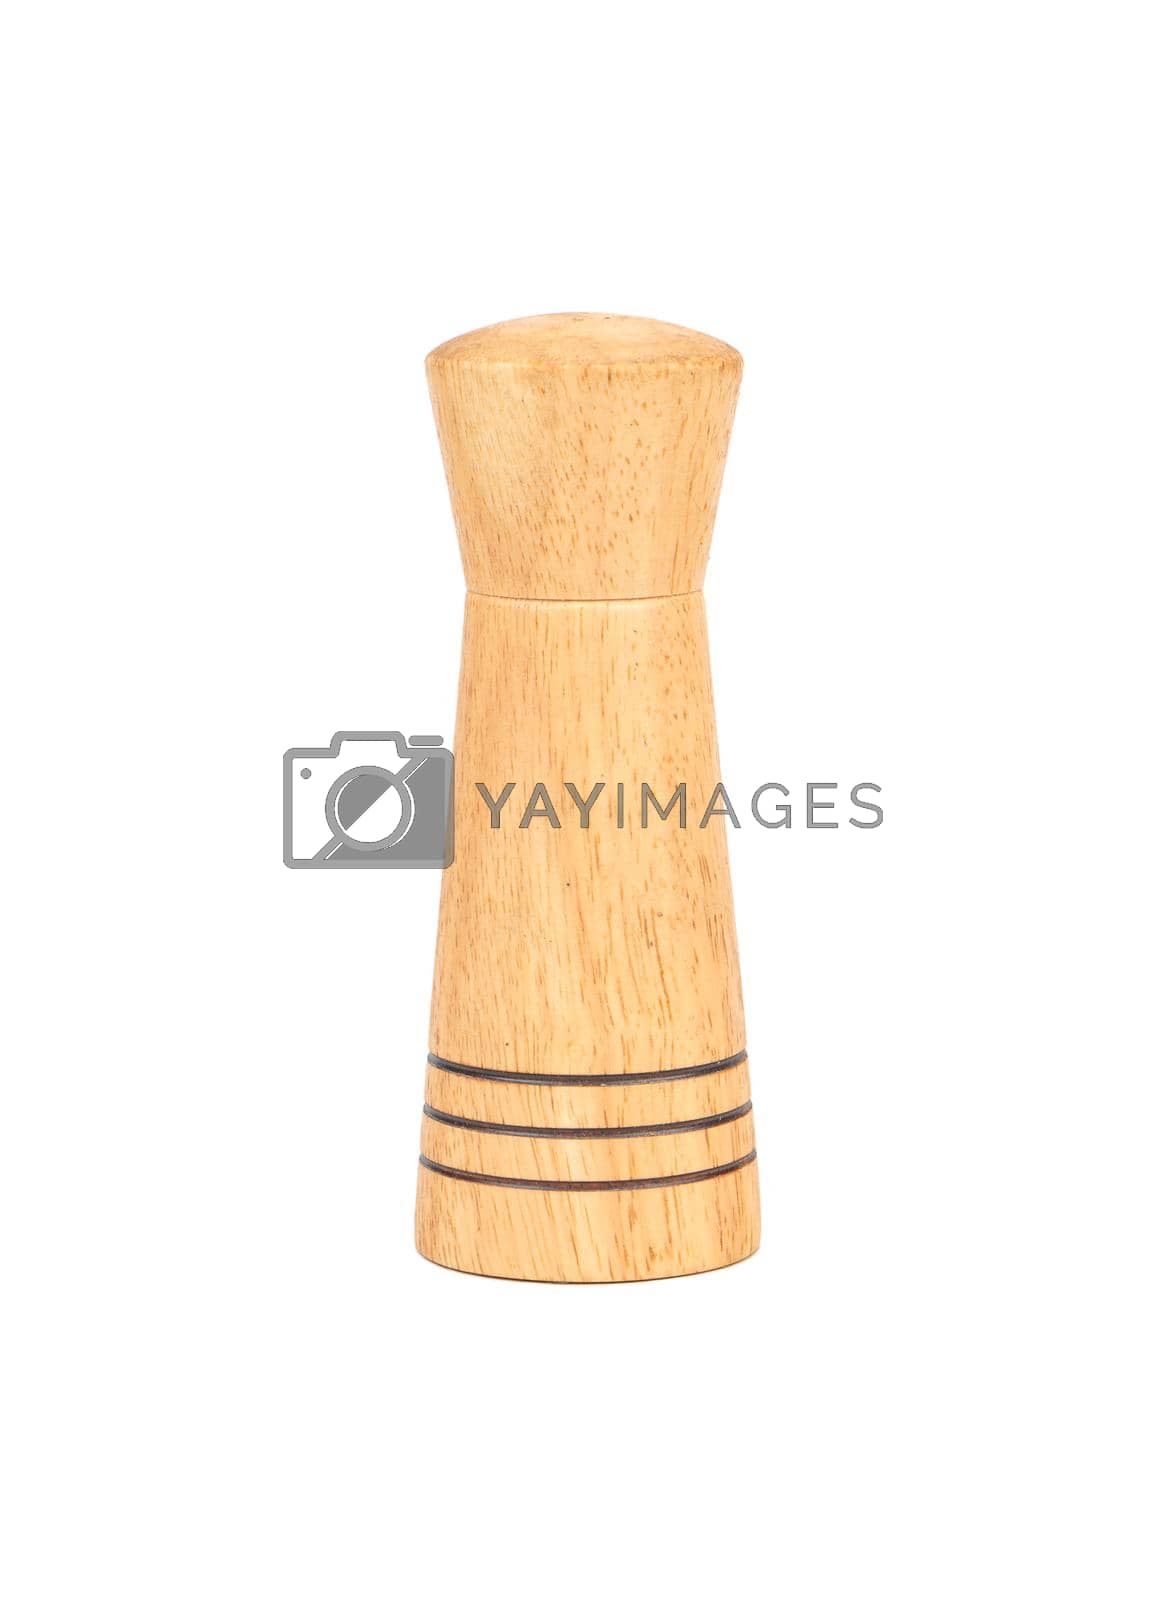 Royalty free image of Wooden salt shaker by andregric